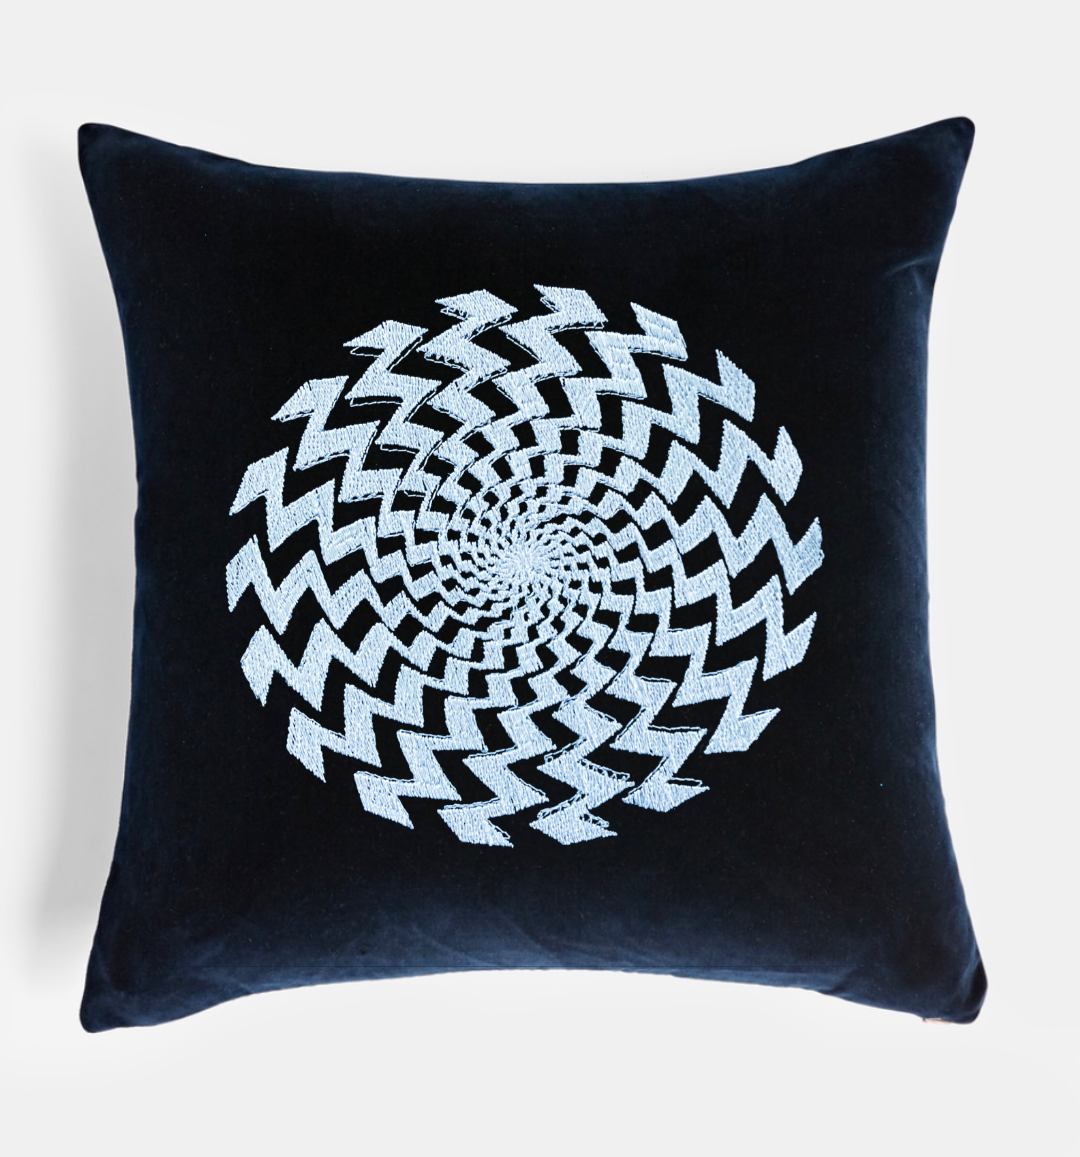 Modern Spiral Embroidered Decorative Pillow Cover 16" x 16"